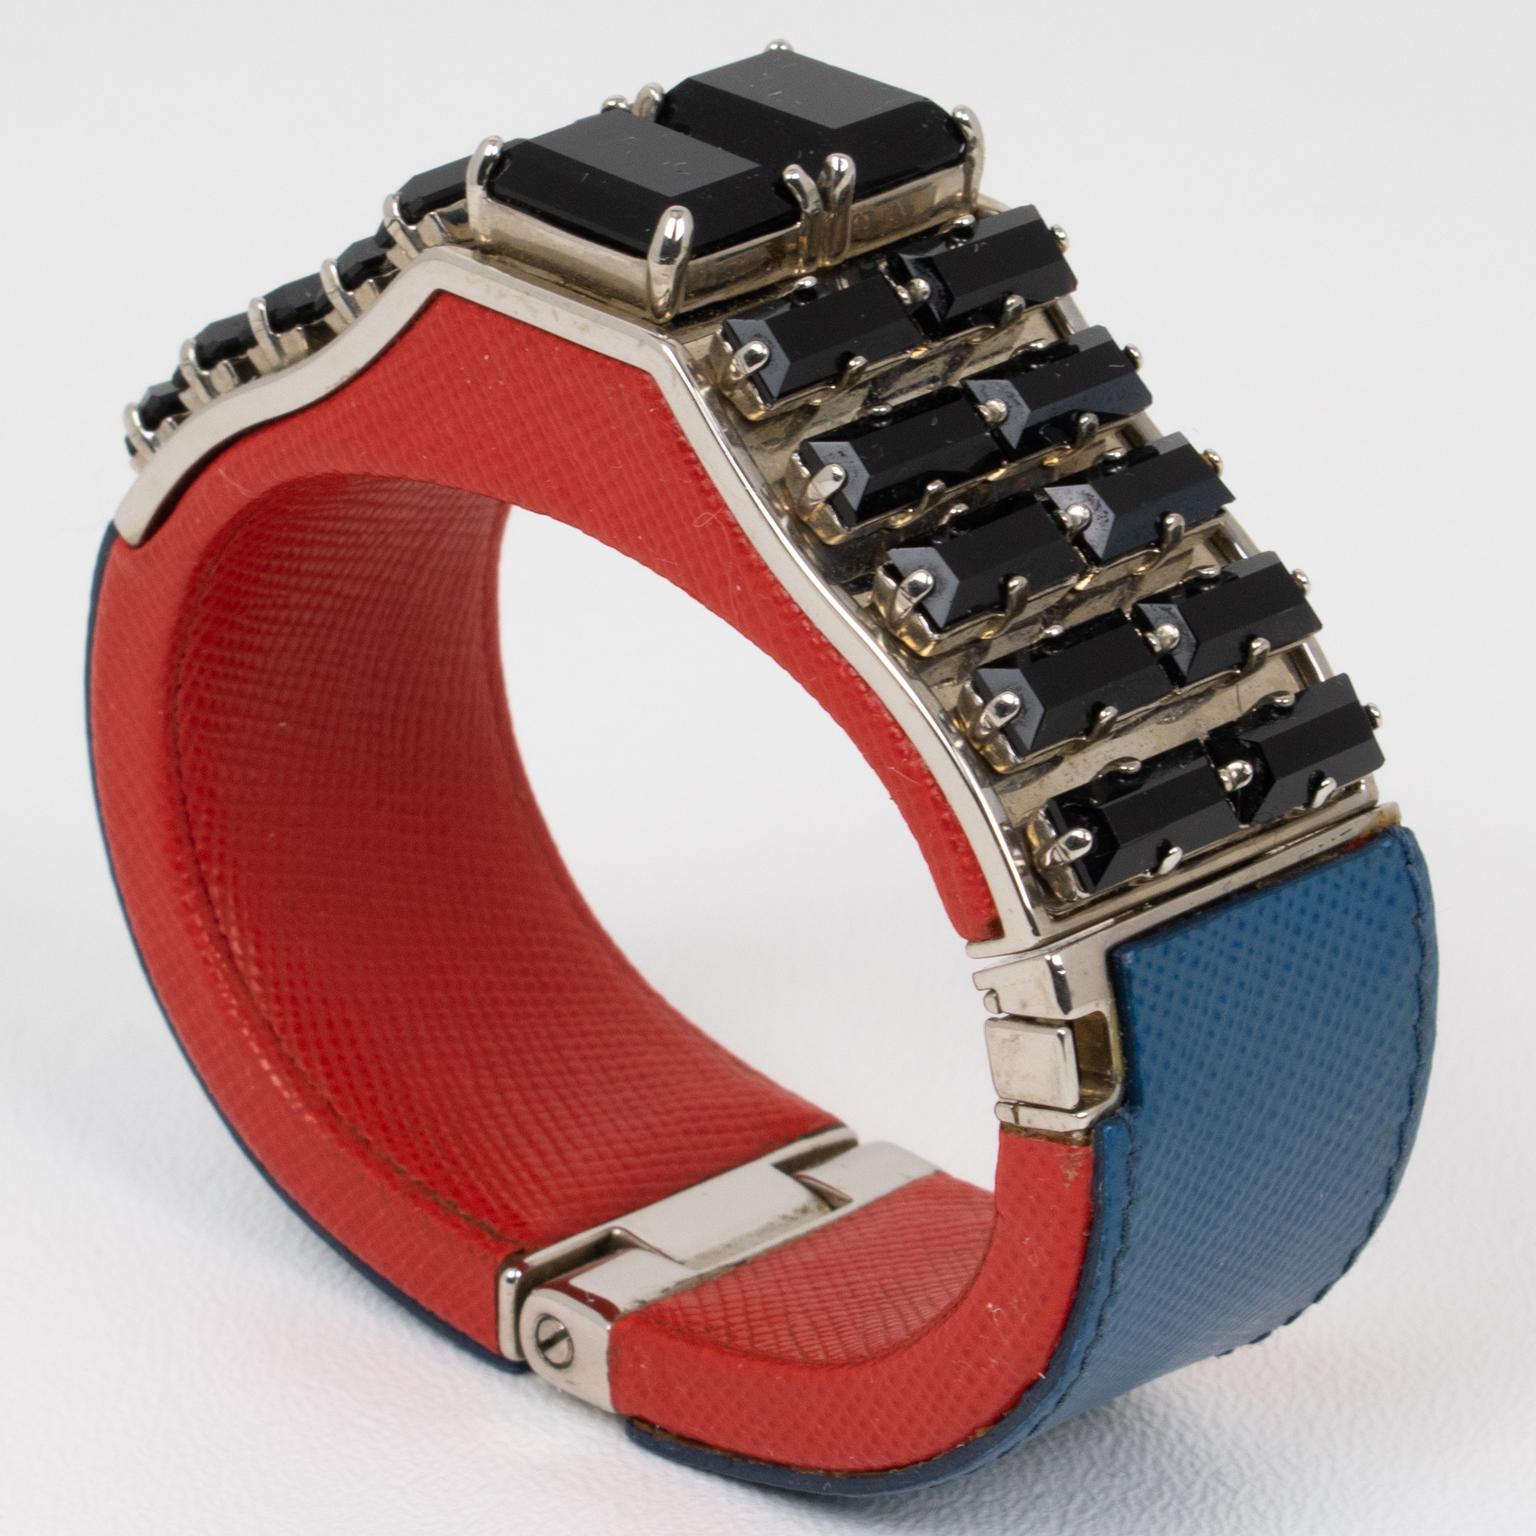 Prada, Italy, designed this extraordinary clamper bracelet for its 2014 runway spring-summer ready-to-wear and resort shows. This striking accessory combines the luxurious allure of blue and red Saffiano leather with the mysterious accents of black